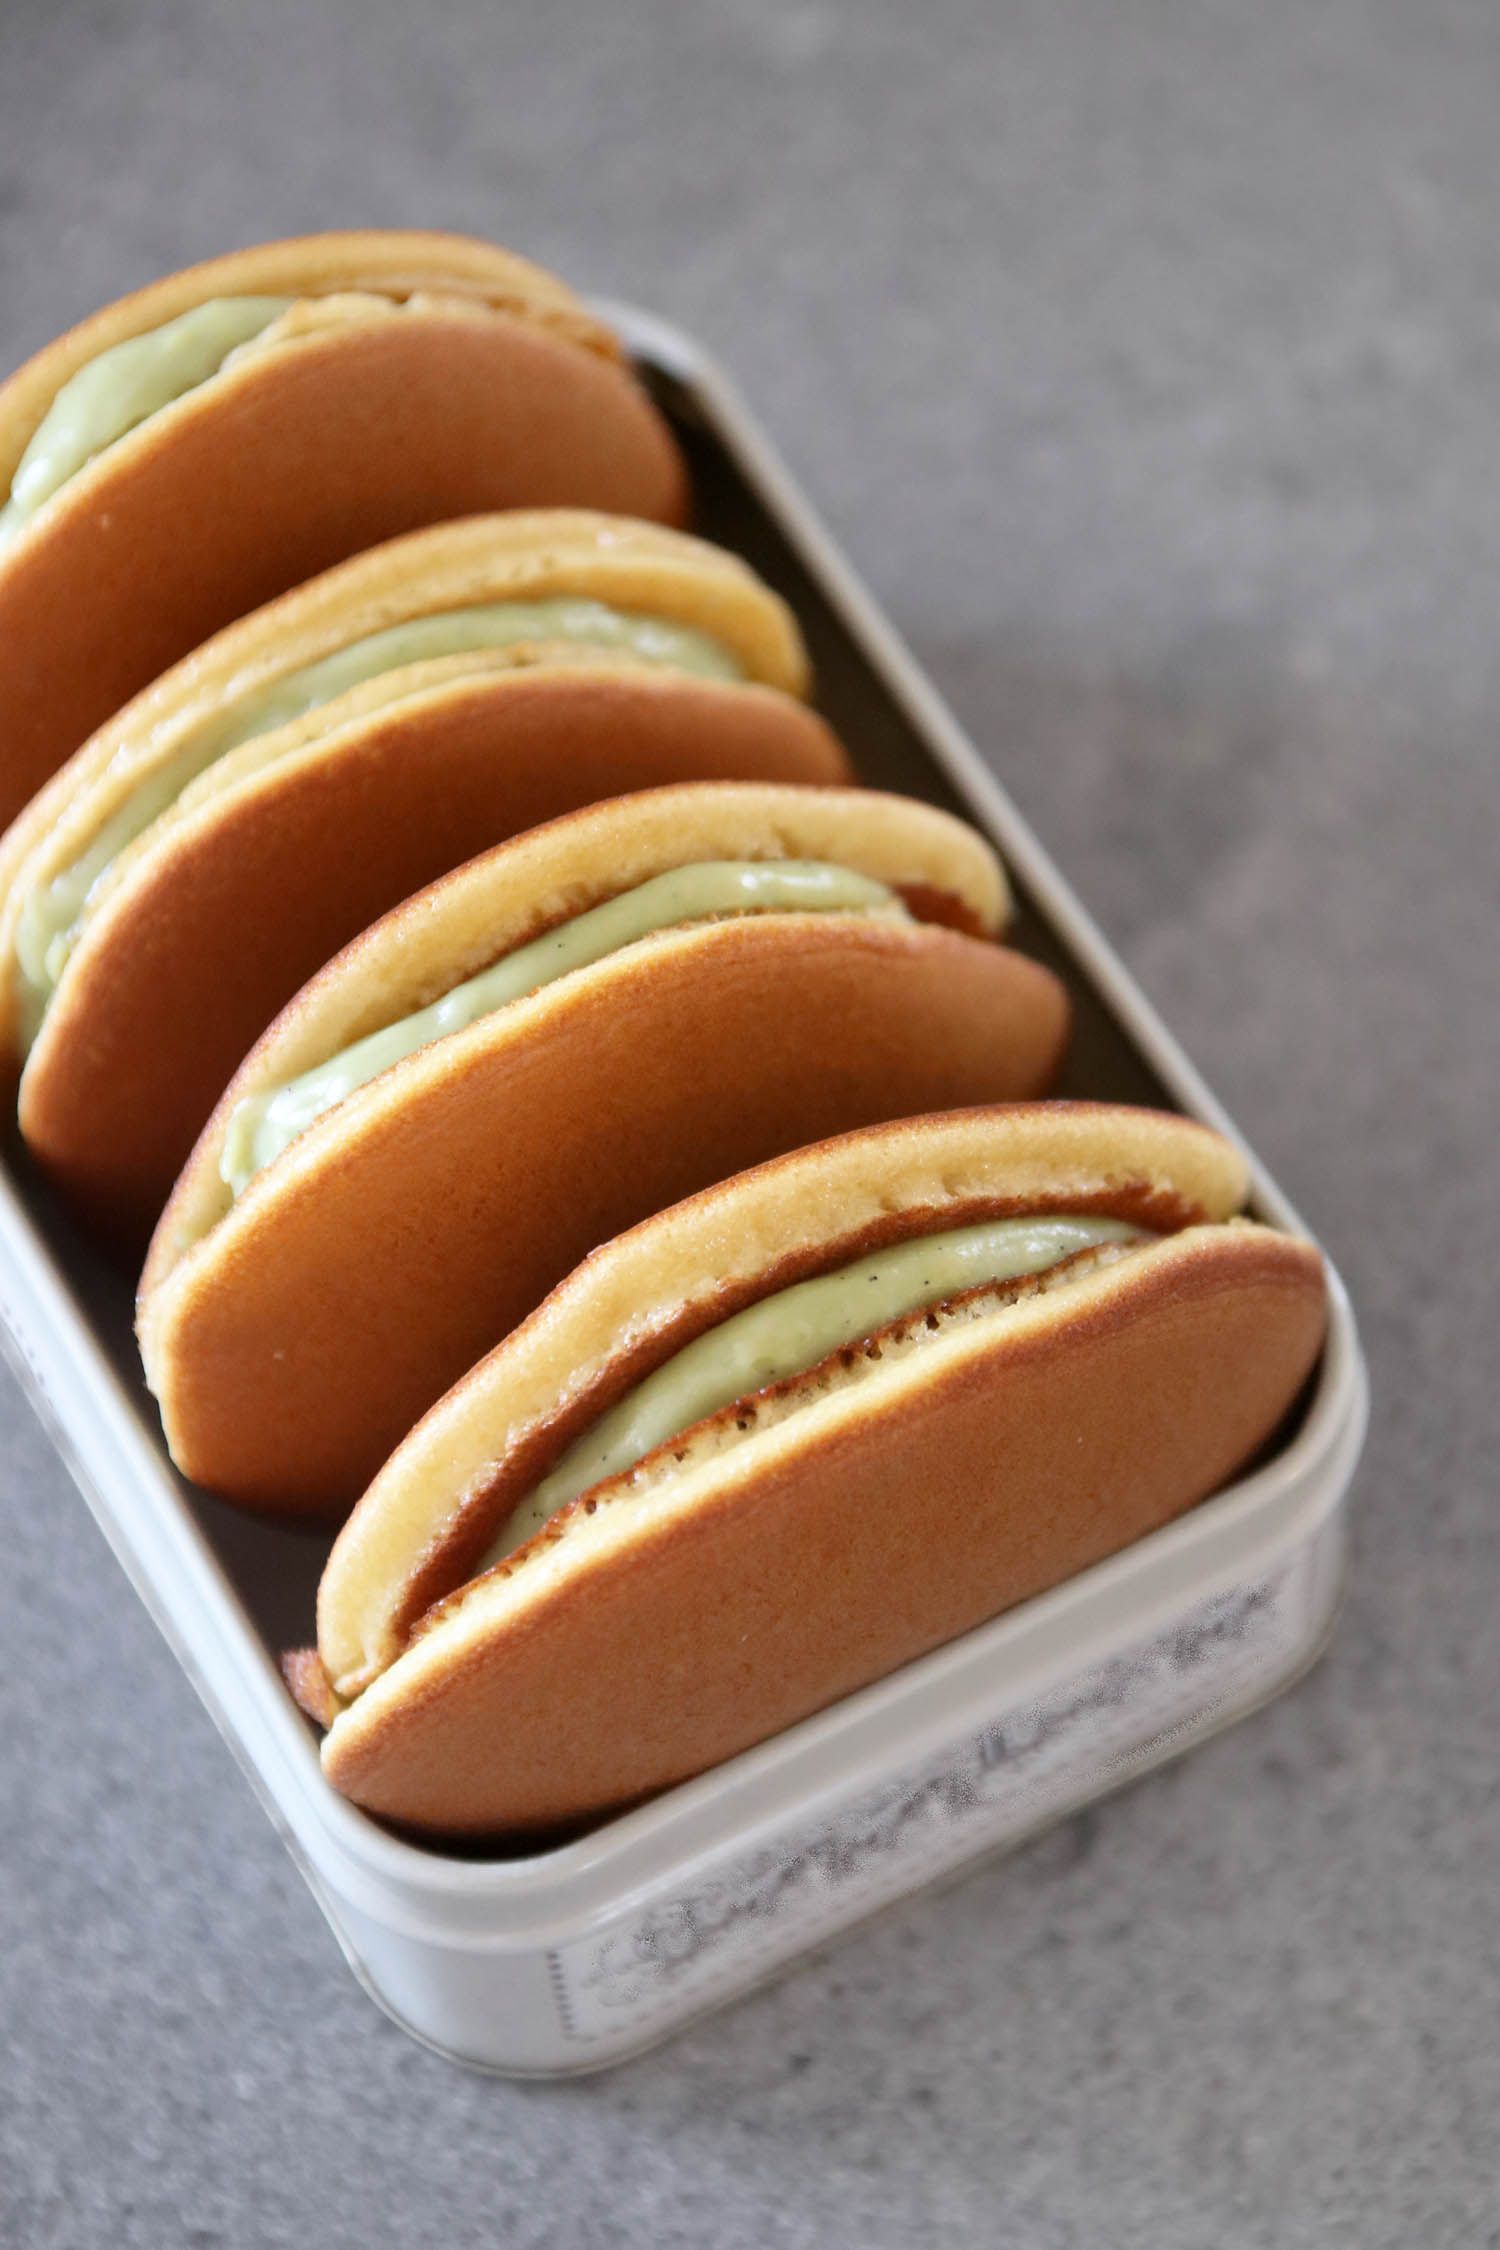 Dorayaki - Japanese Pancakes Filled with Matcha Pastry Cream | Lil' Cookie